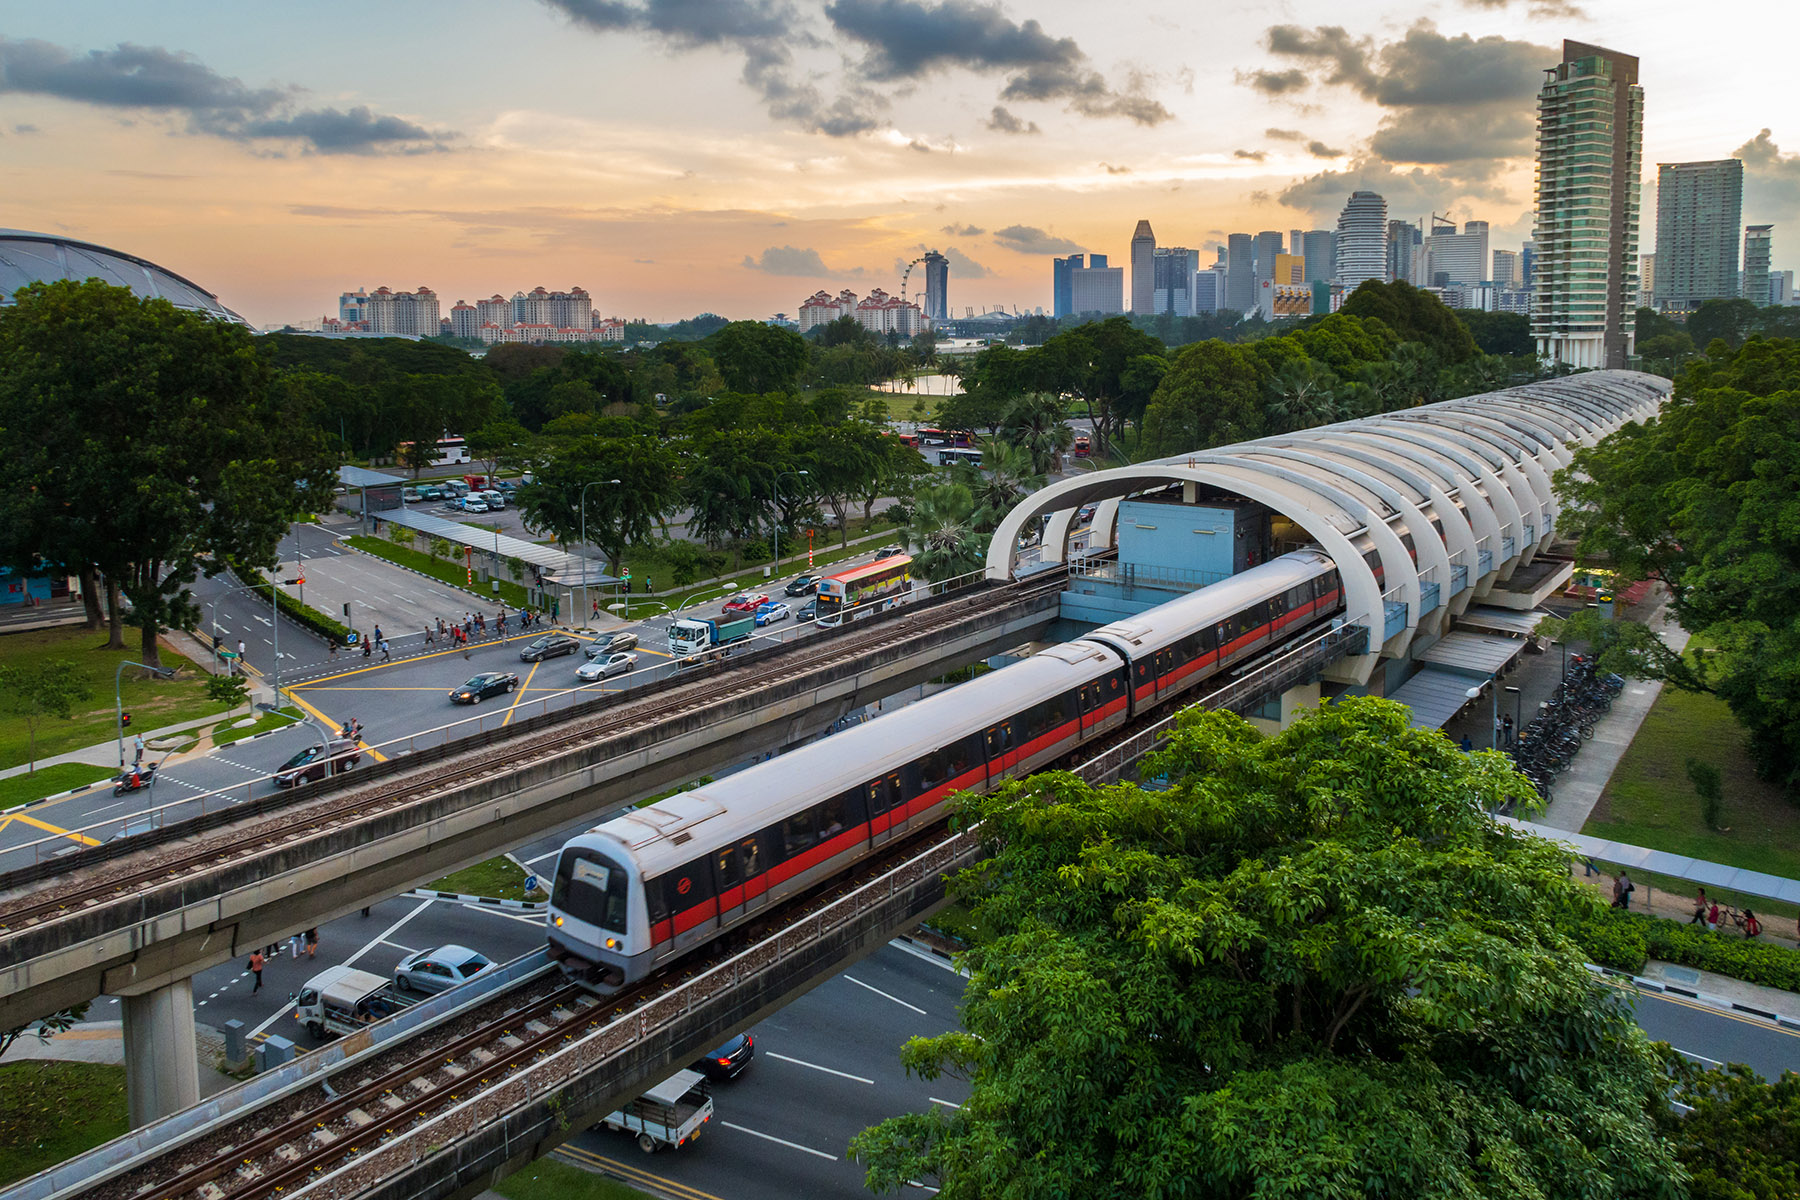 A high angle view of Singapore's Mass Rapid Transit (MRT) railway and train, Kallang Station